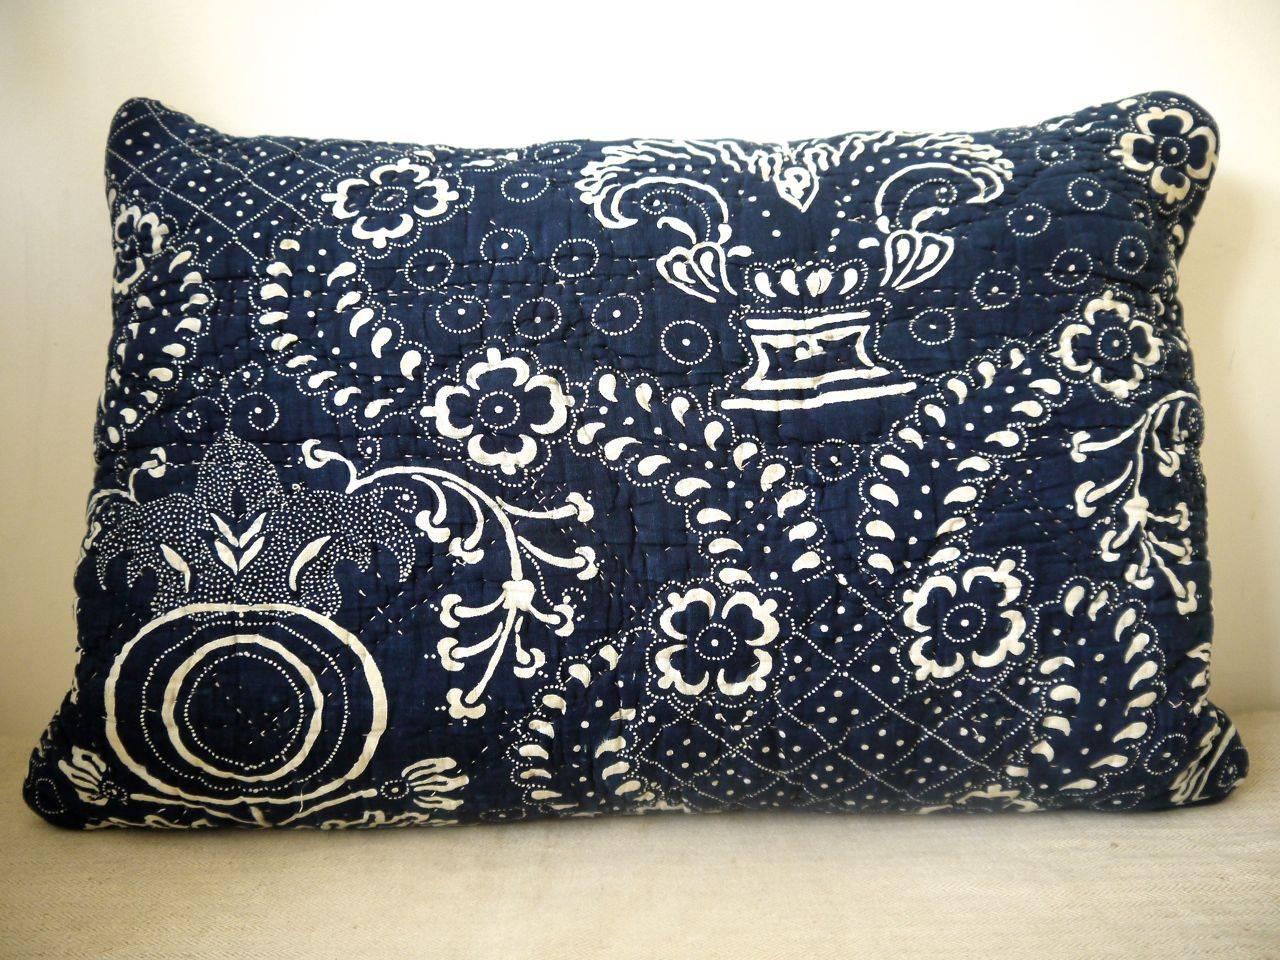 French Toile de Nimes indigo resist block printed lumbar cushion. Striking design of stylized pomegranate and floral motifs. Simply quilted and block printed on a soft cotton and backed with dyed 19th century linen. Slip stitched closed with a duck